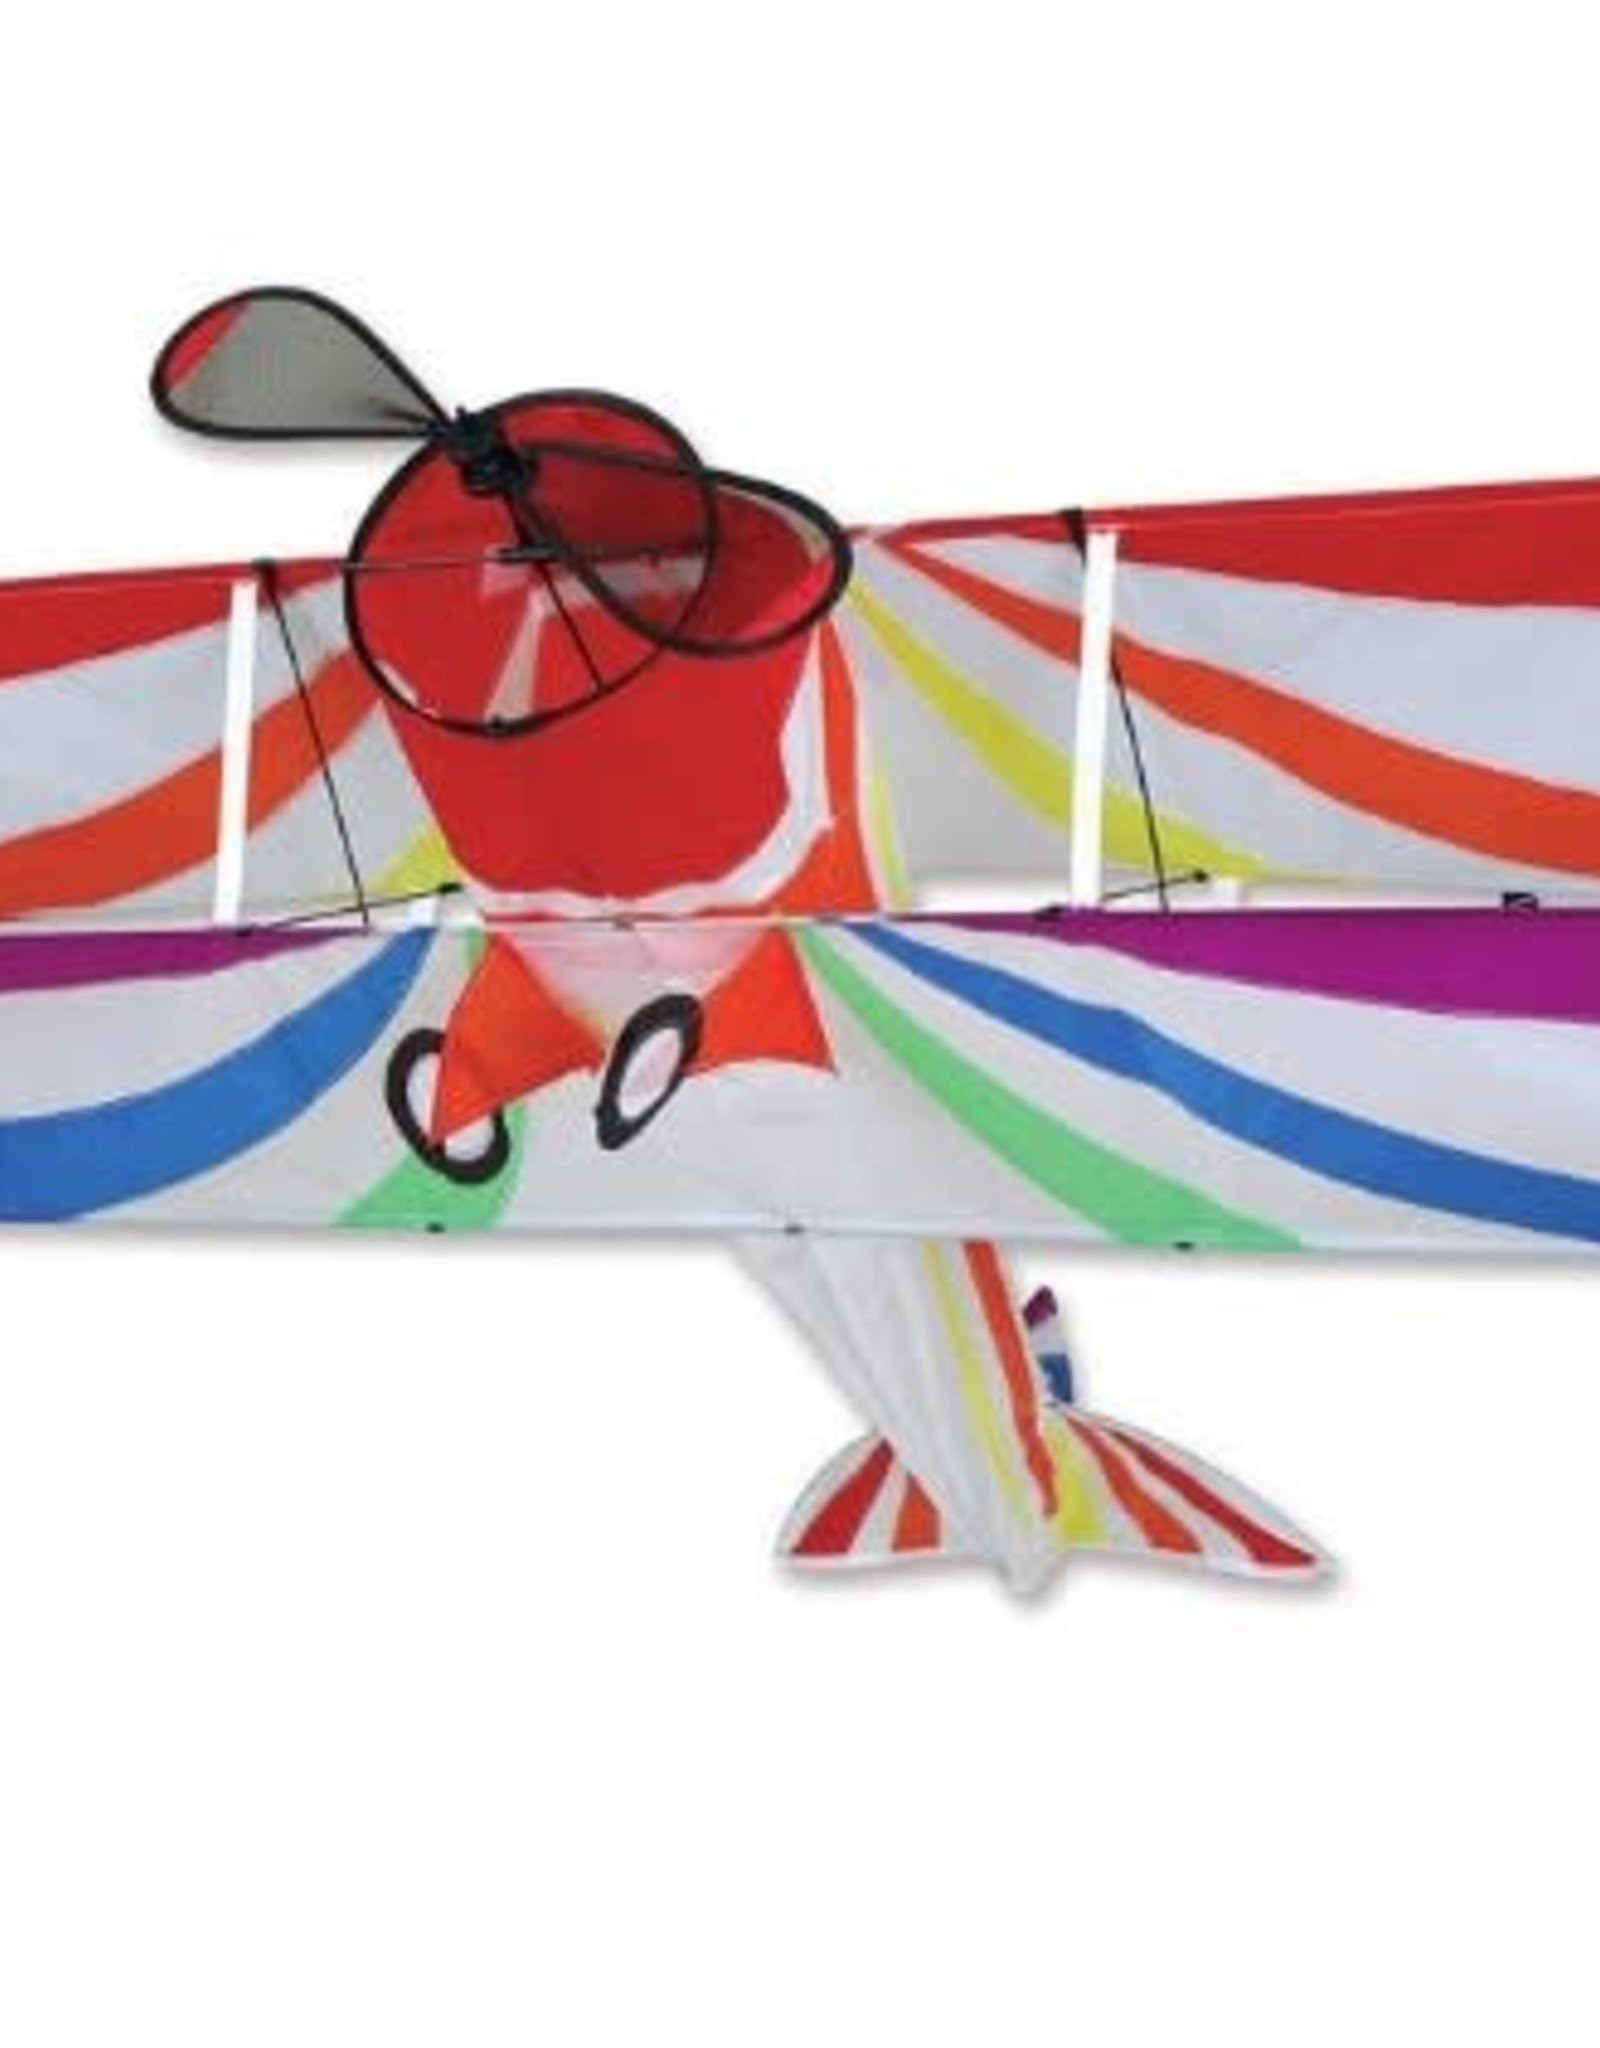 Premier Kites RAINBOW BI-PLANE KITE *Not available for shipping. Pick up only.